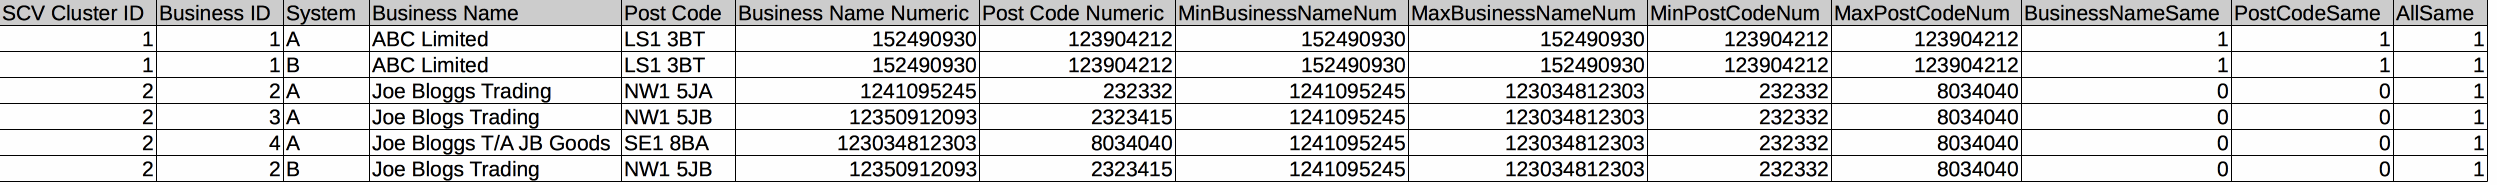 data table, showing all previous fields, plus max/min values for BusinessNameNum, PostCodeNum, and Boolean values for BusinessName same, PostCode same , and all same values same checks